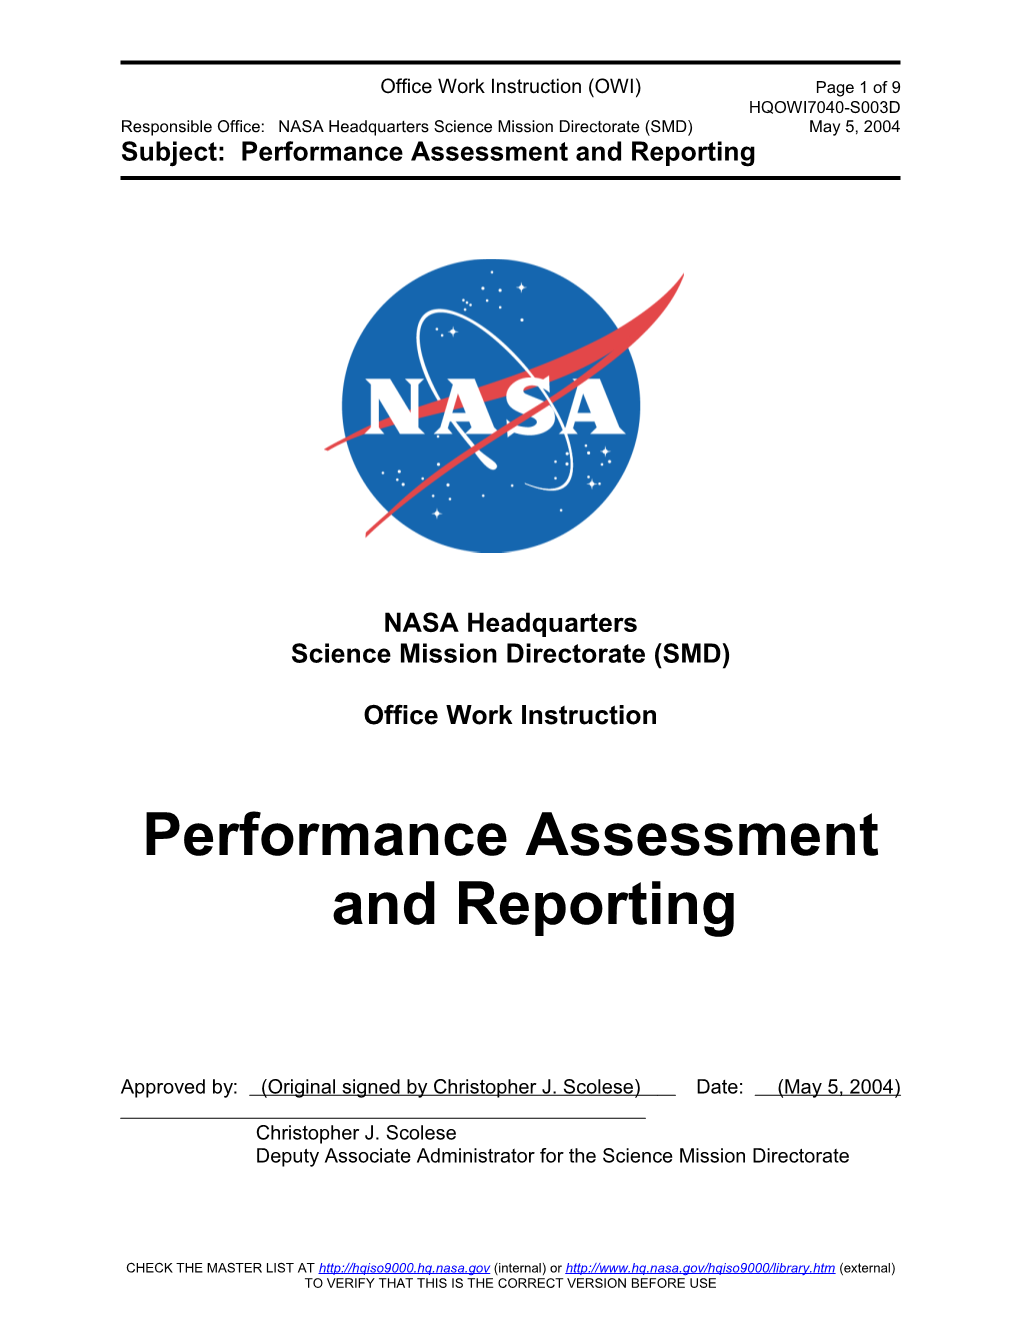 Subject: Performance Assessment and Reporting